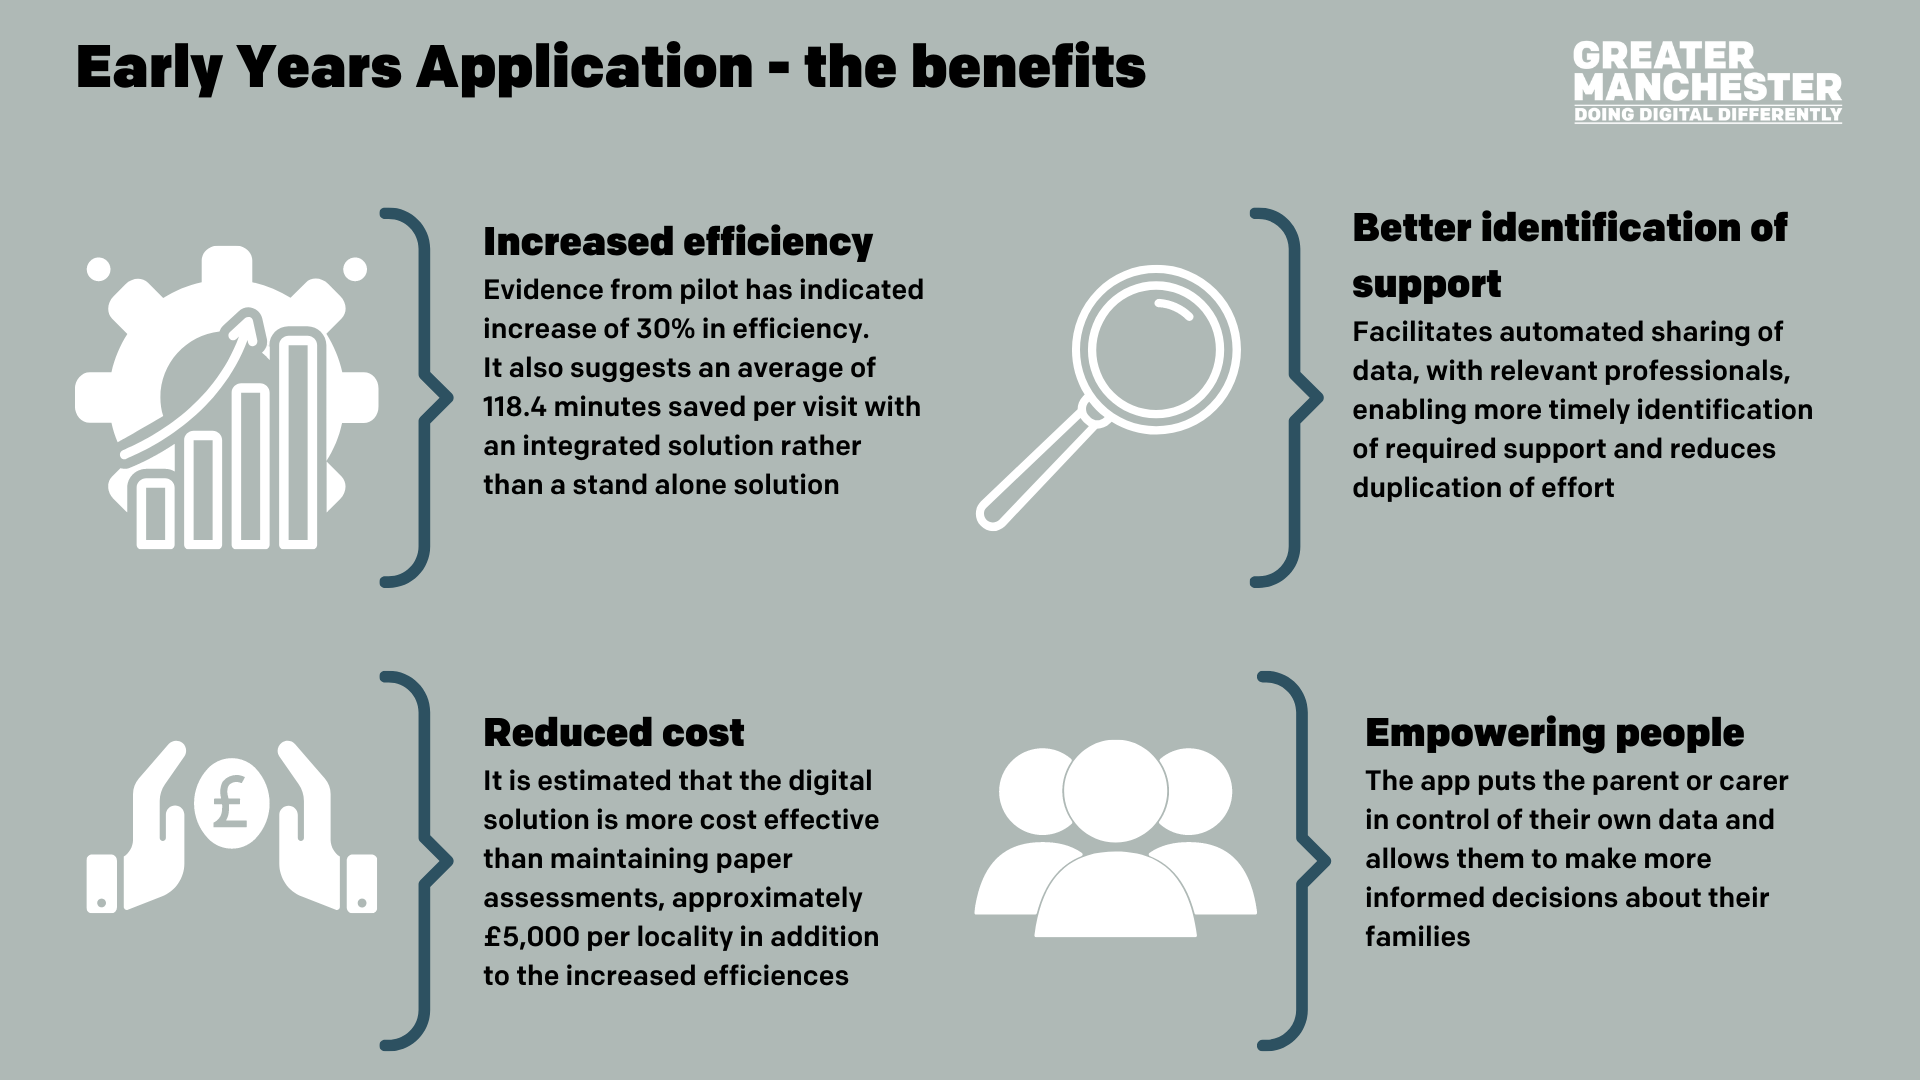 Graphic with title Early Years Application - the benefits, with four icons displaying four different headings - increased efficiency, reduced cost, better identification of support, empowering people